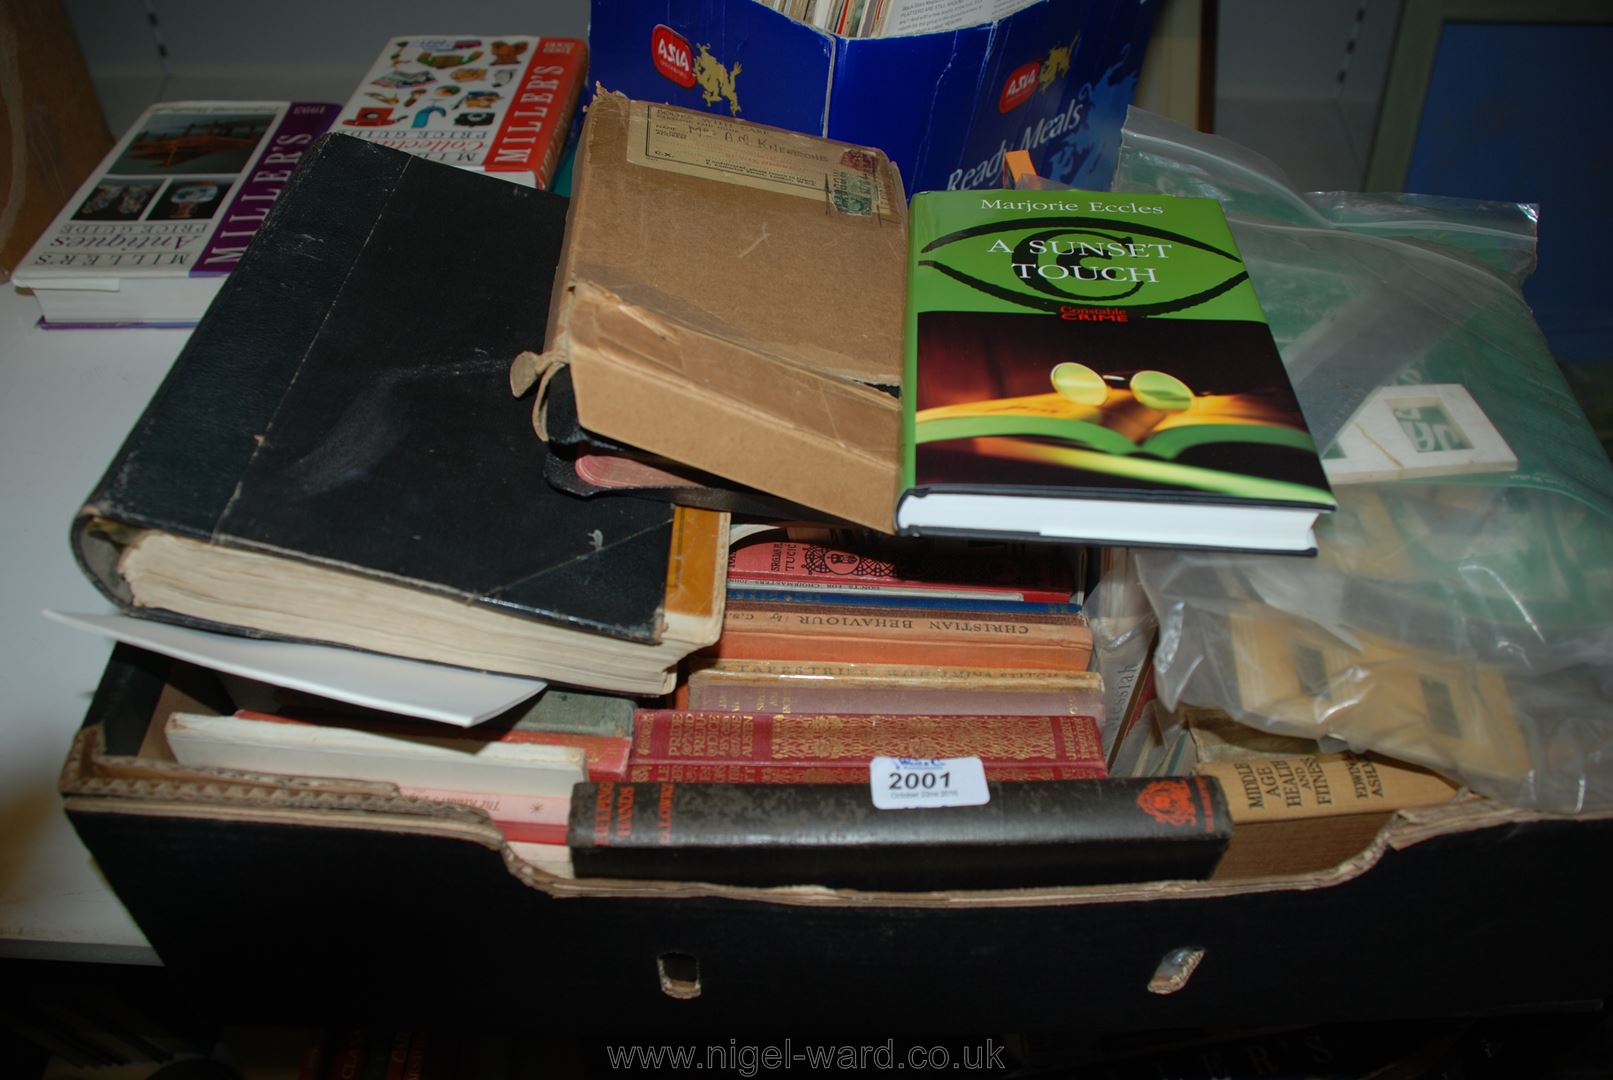 Quantity of novels including: A Sunset Touch, religious books etc.